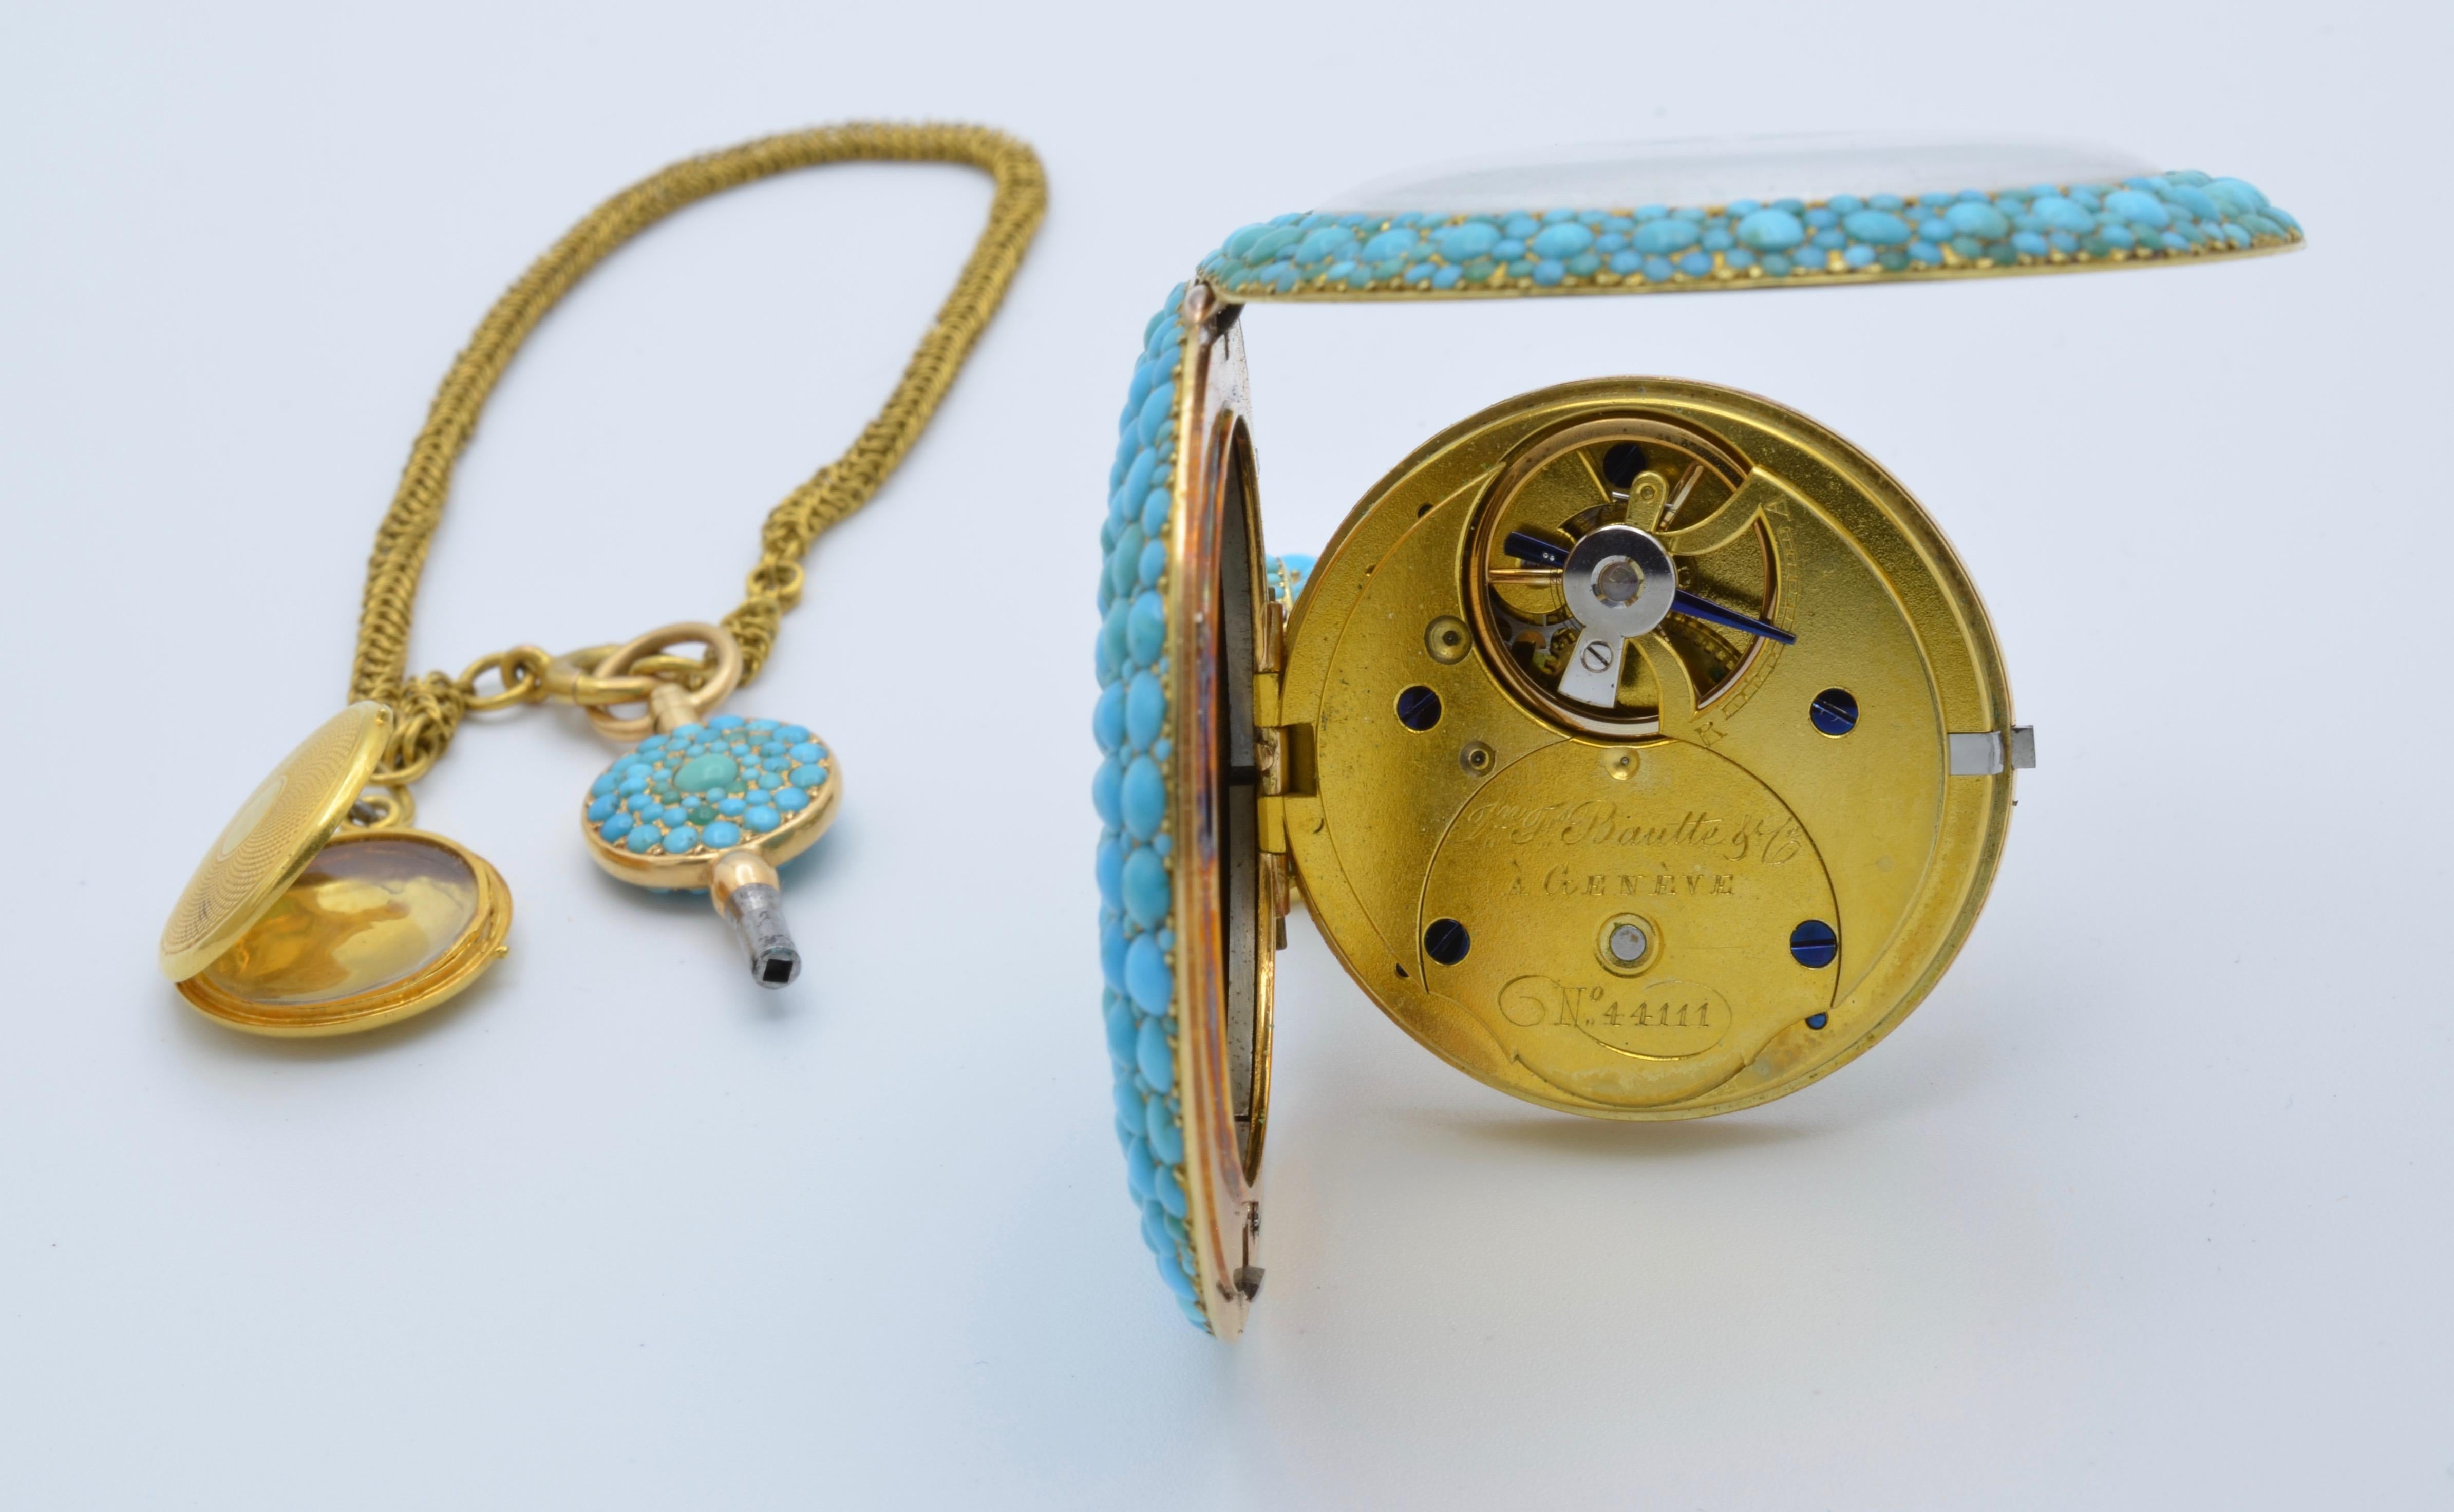 1830 Turquoise Lapel Gold Pocket Watch Bautte and Co with Chain and Locket 2